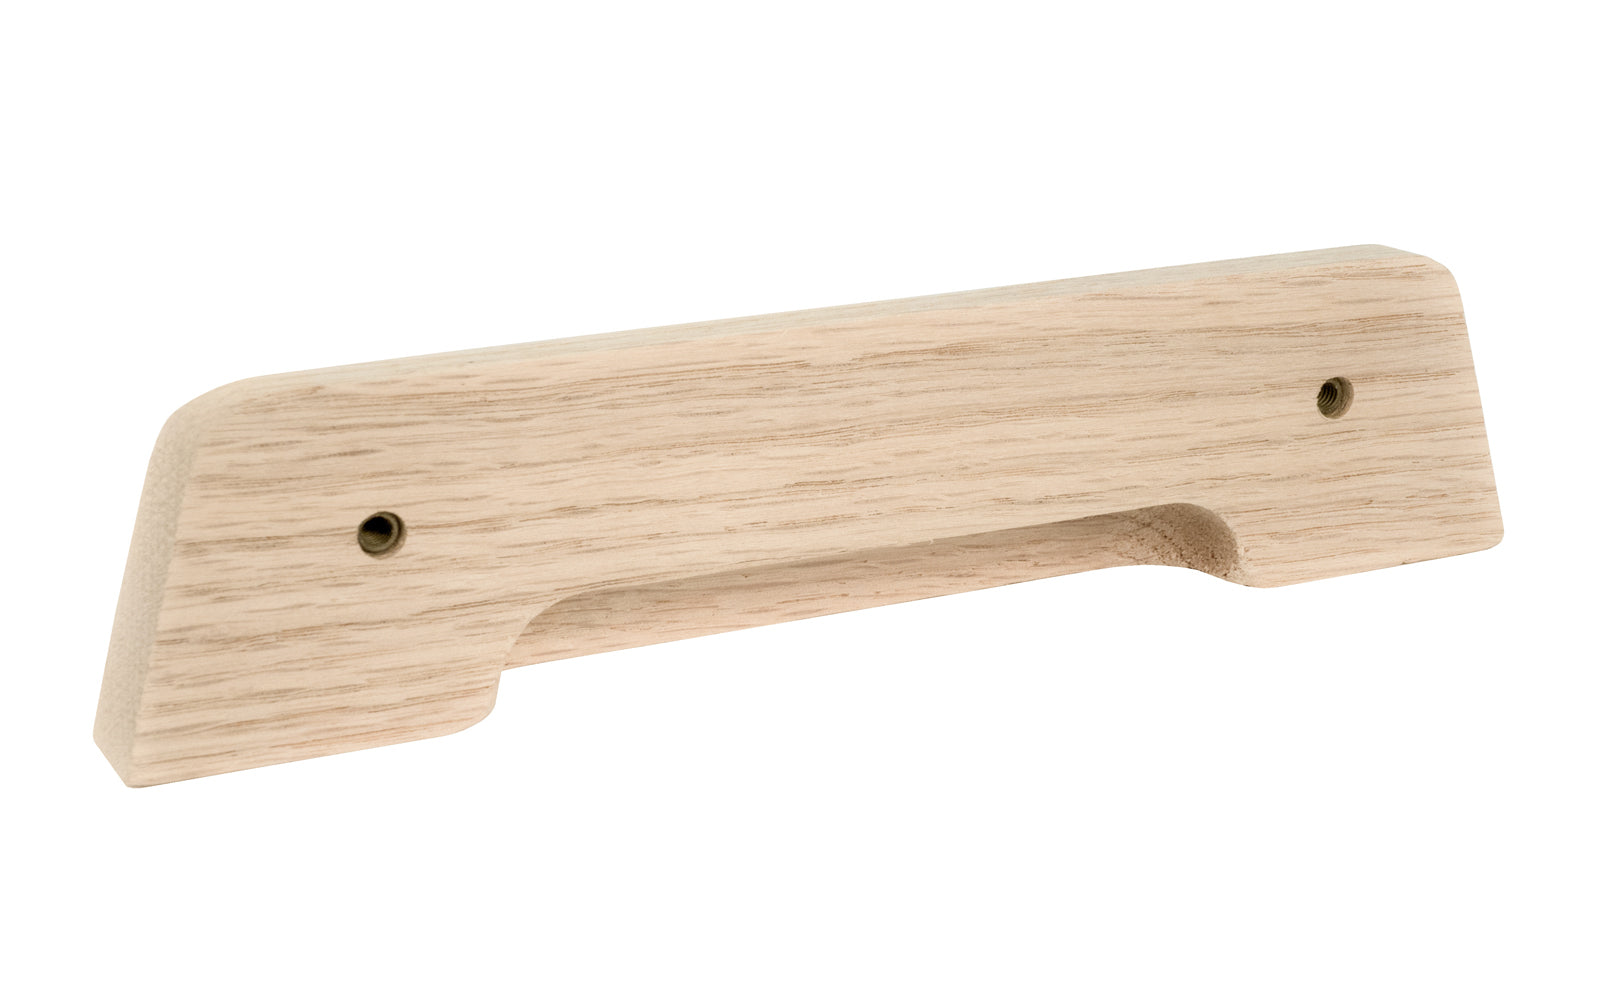 Classic & traditional smooth oak wood handle pull with 5" On Centers. Made of unfinished solid oak wood, this handle has a smooth feel & nice-looking grain to it. It may even be stained, painted, or varnished if desired. 5" spacing of screw holes. Solid oak pull this handle has straight lines & flat surfaces.